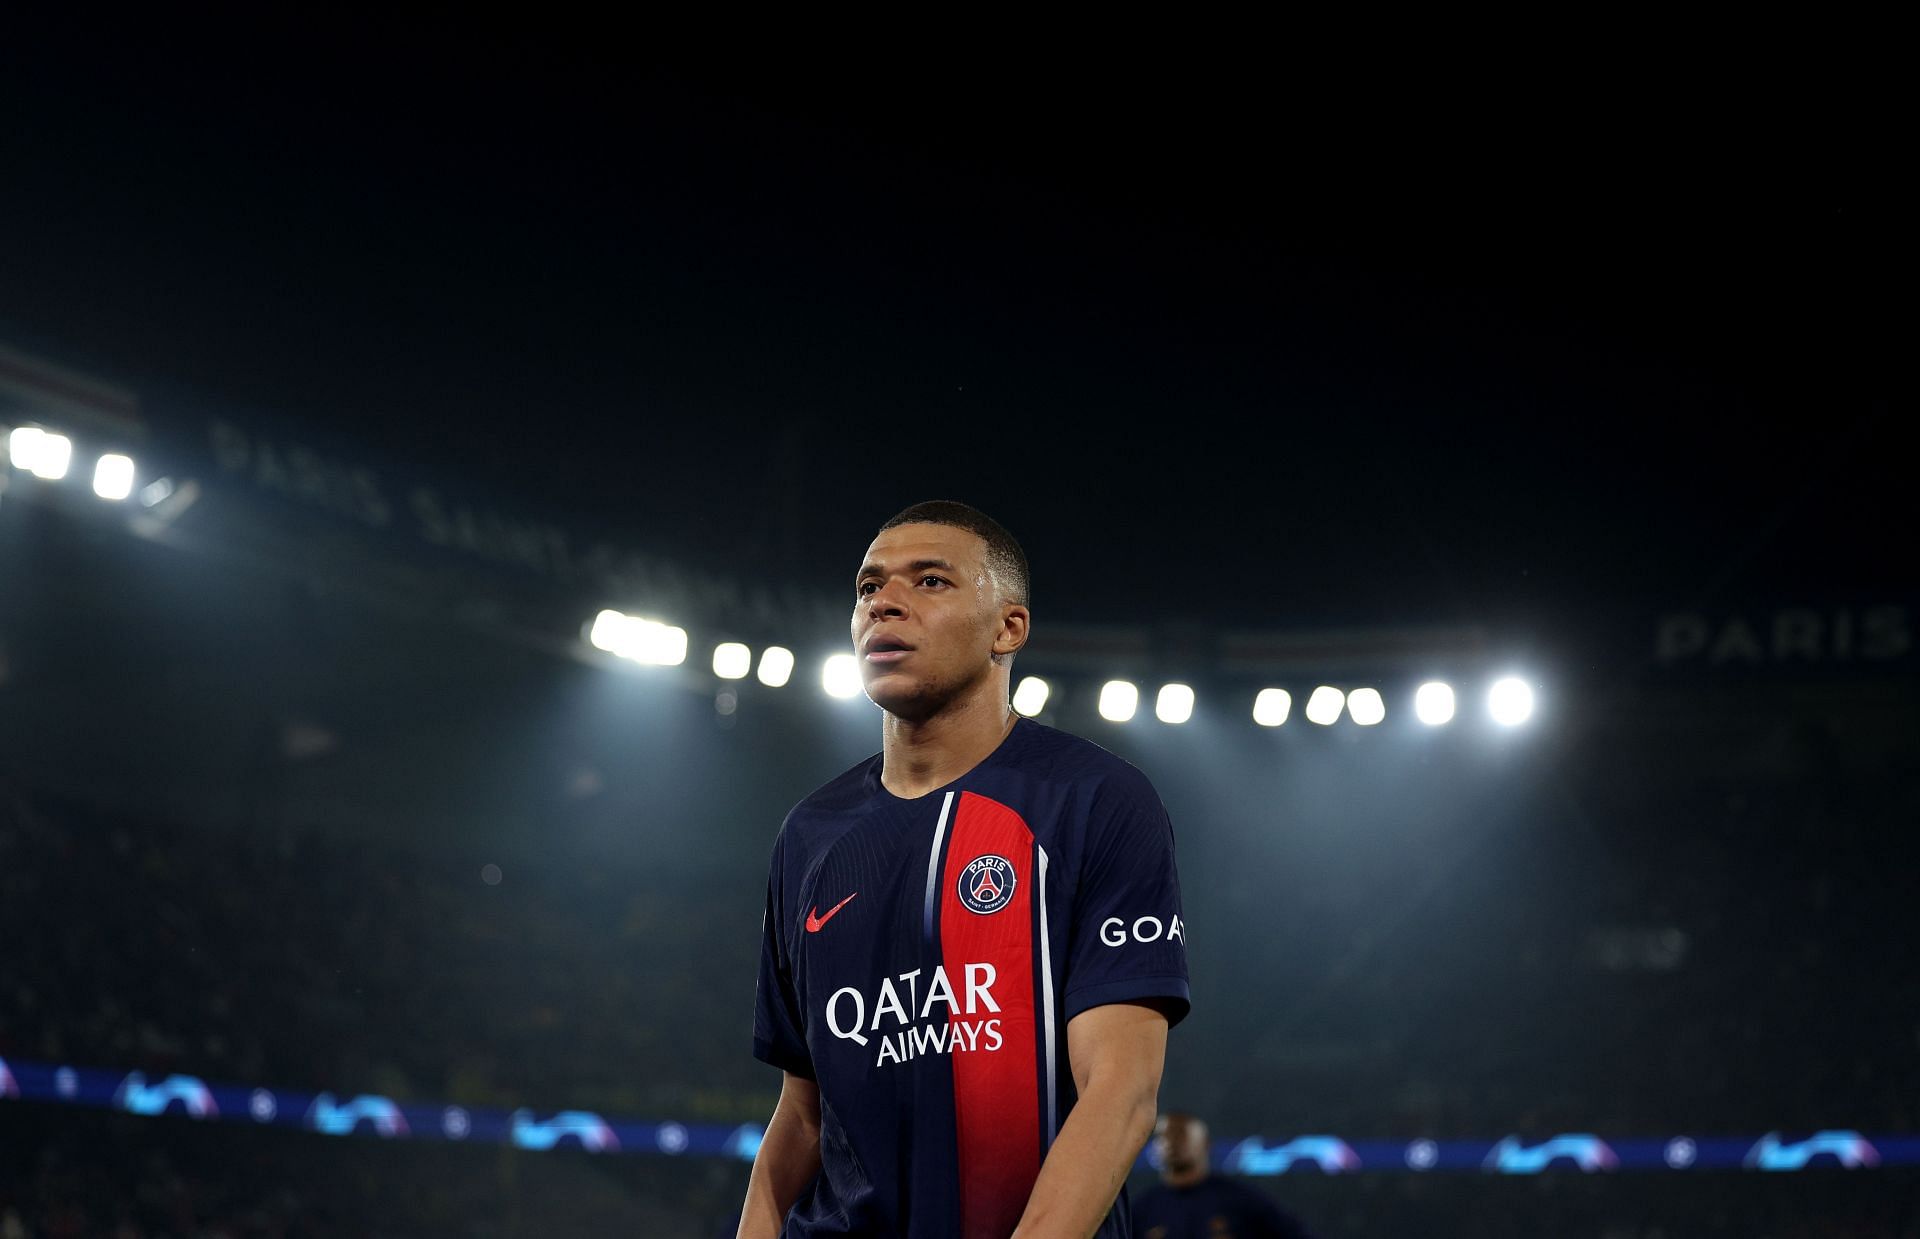 Kylian Mbappe asked if he’ll support Real Madrid or Bayern Munich after